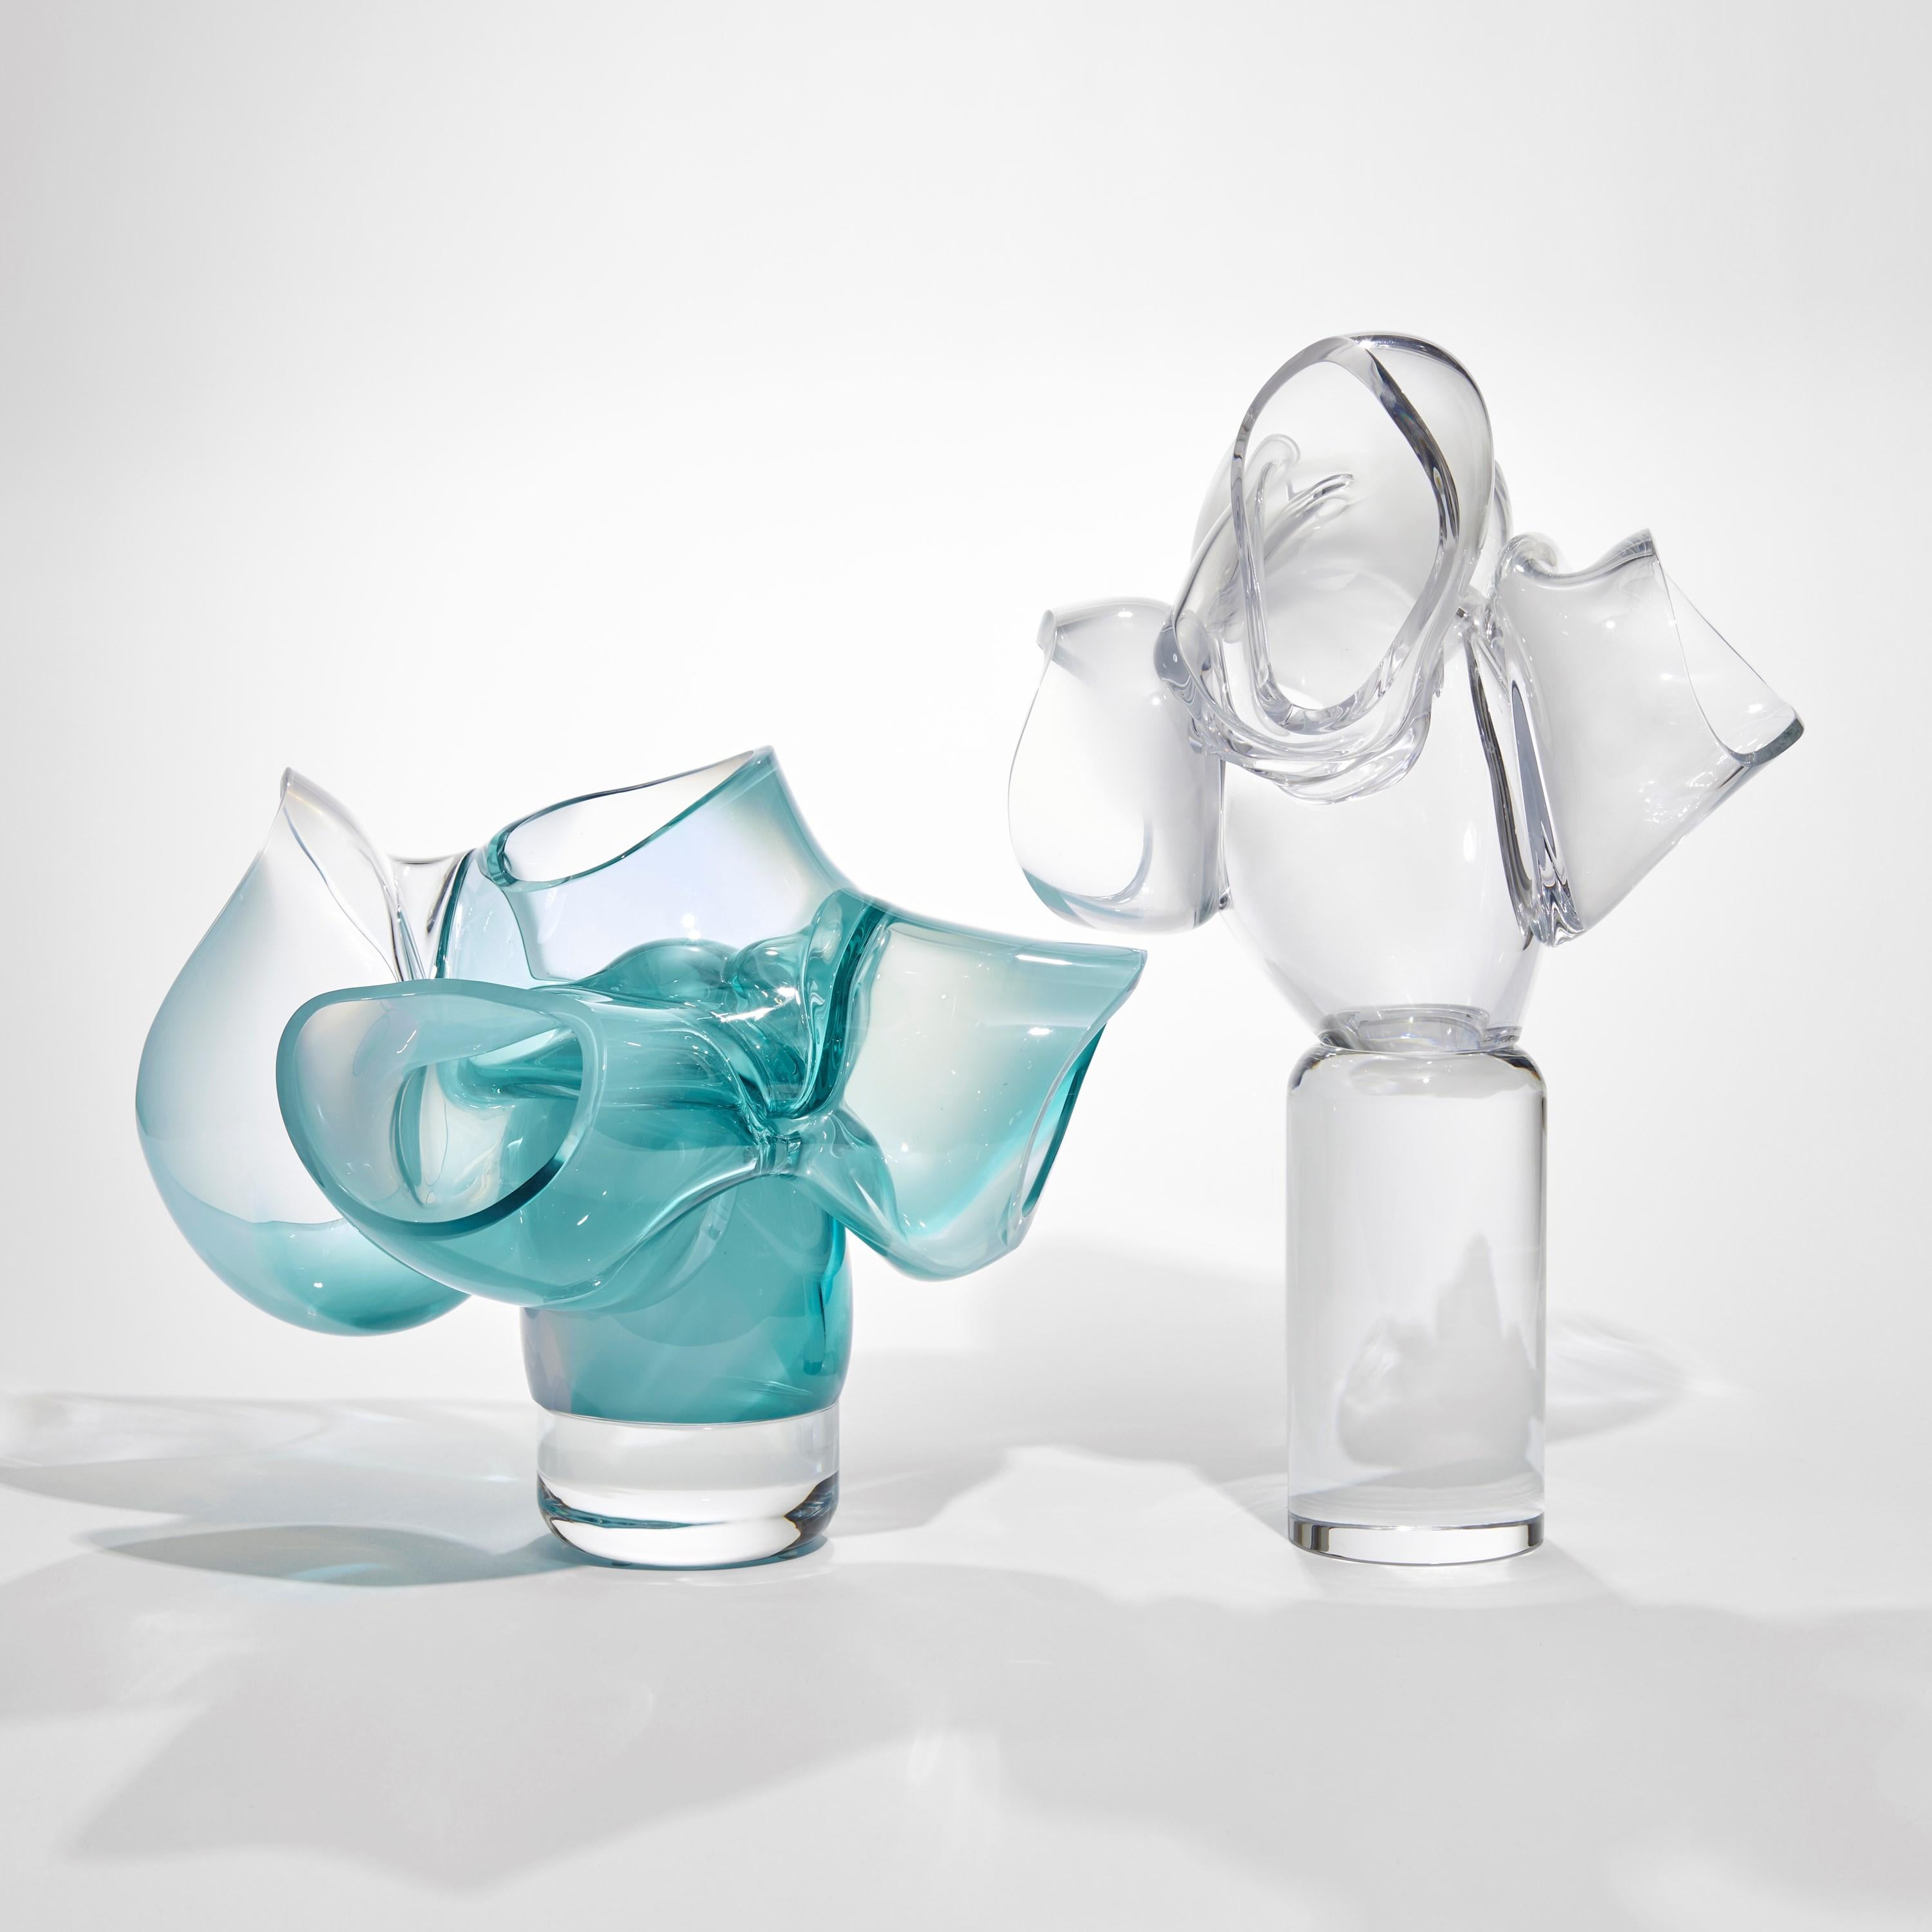 Hand-Crafted Heart Flower in Clear & Frost, a Sculpted Glass Artwork by Lena Bergström